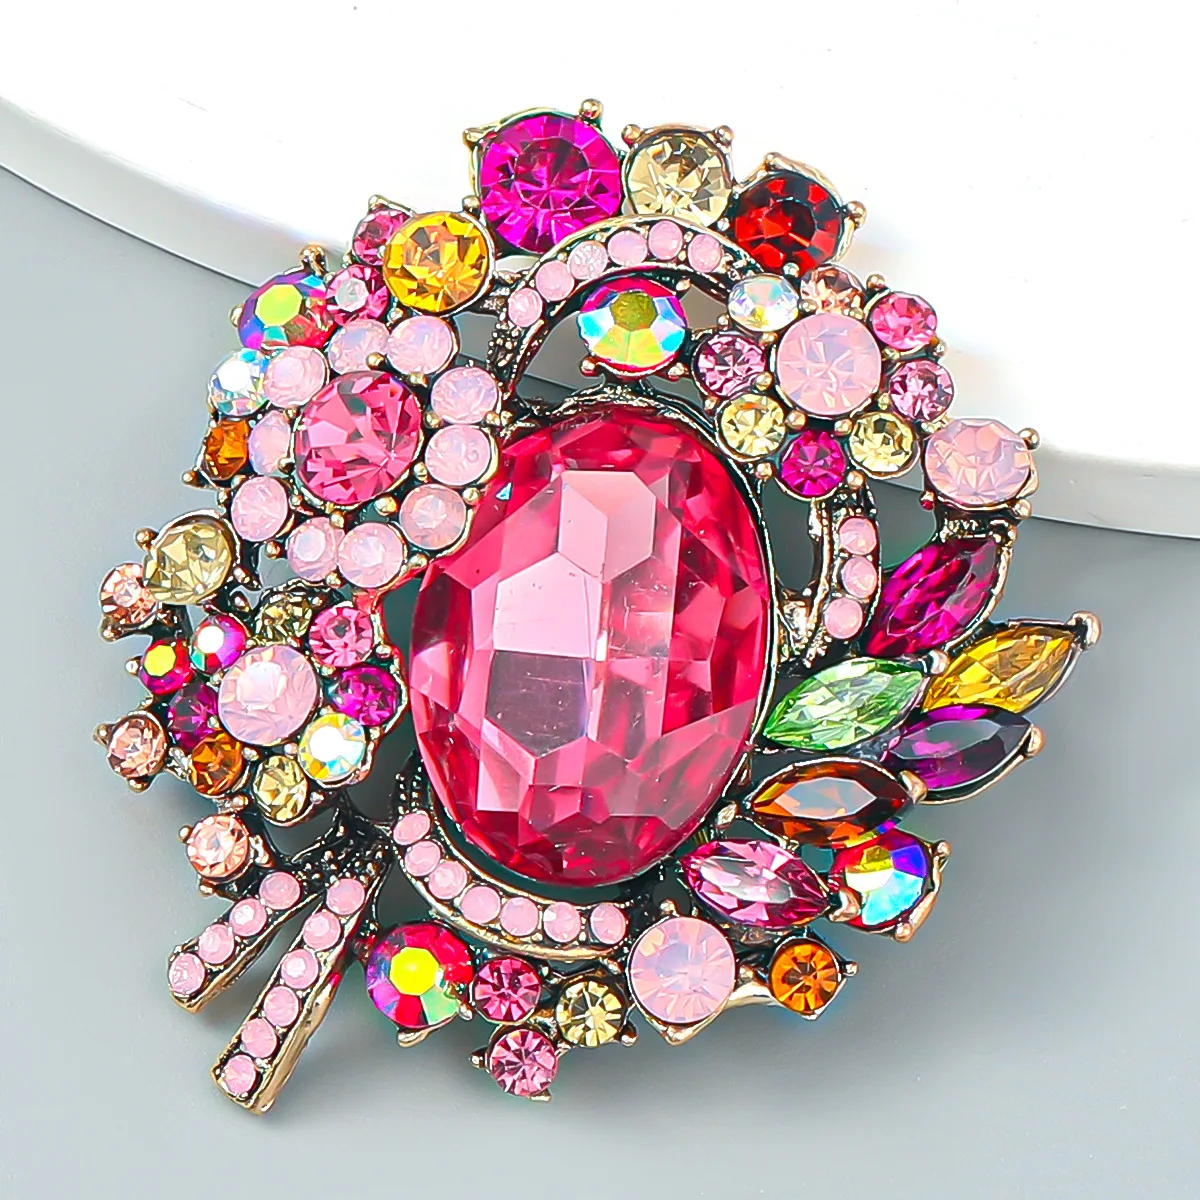 

MITTO NEW DESIGNED HOT FASHION JEWELRIES AND ACCESSORIES MULTI-COLOR RHINESTONES PAVED FLOWER HIGH-GRADE VINTAGE BROOCH